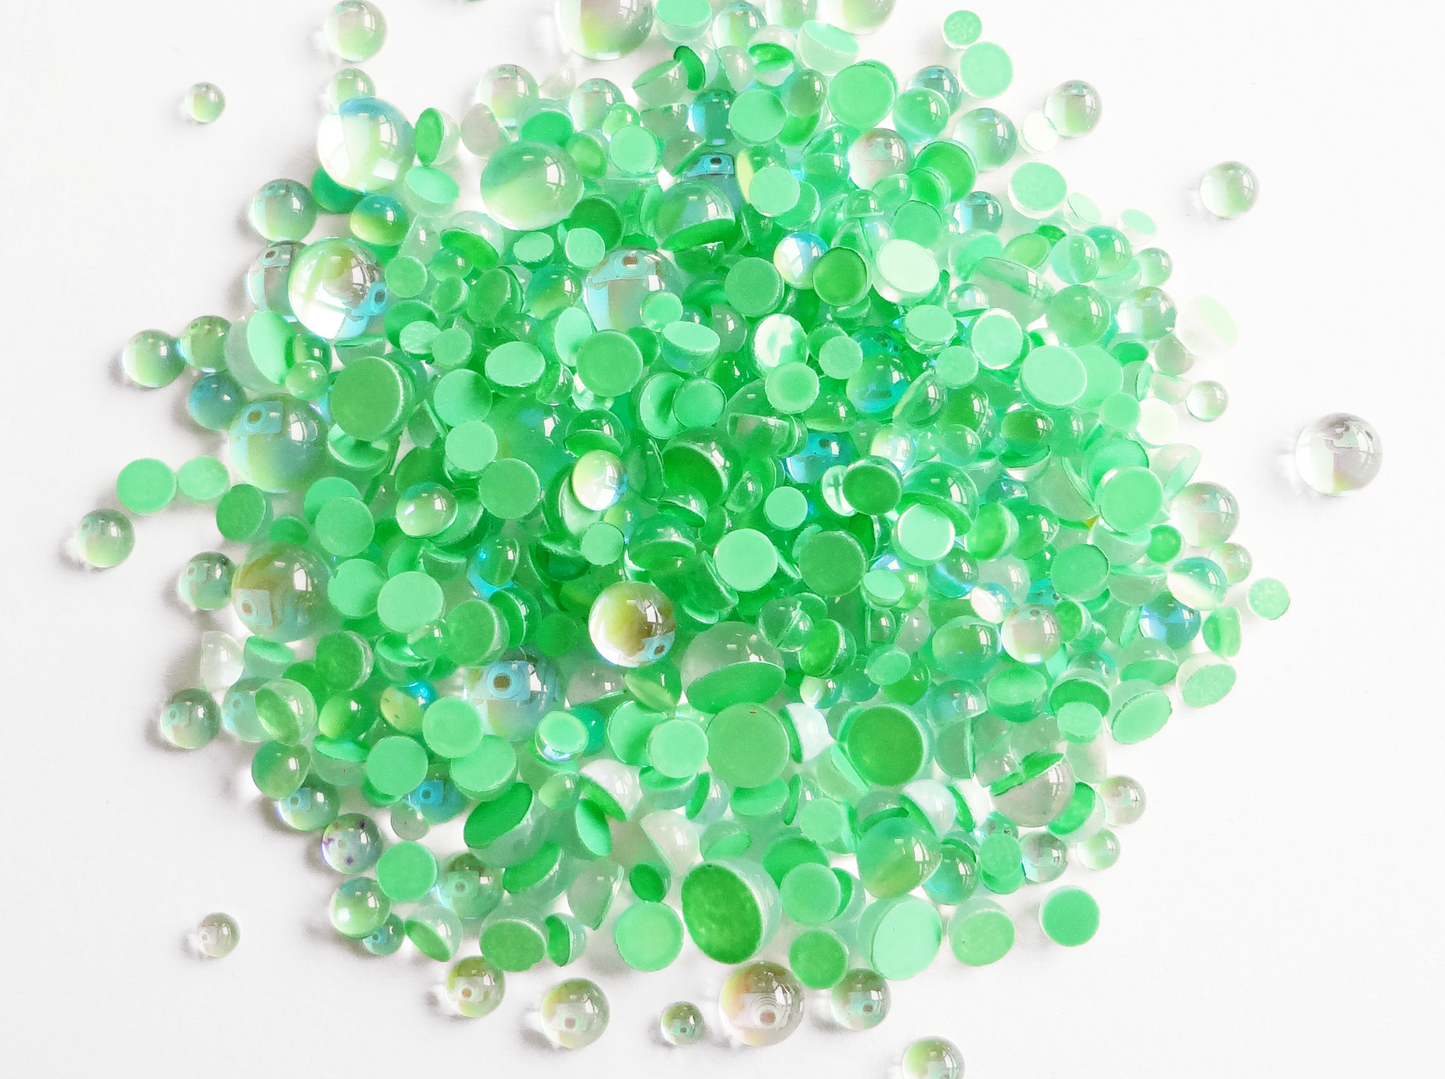 Iridescent Green Glass Bubble Effect Flatbacks, 1mm to 5mm Mixed Sizes